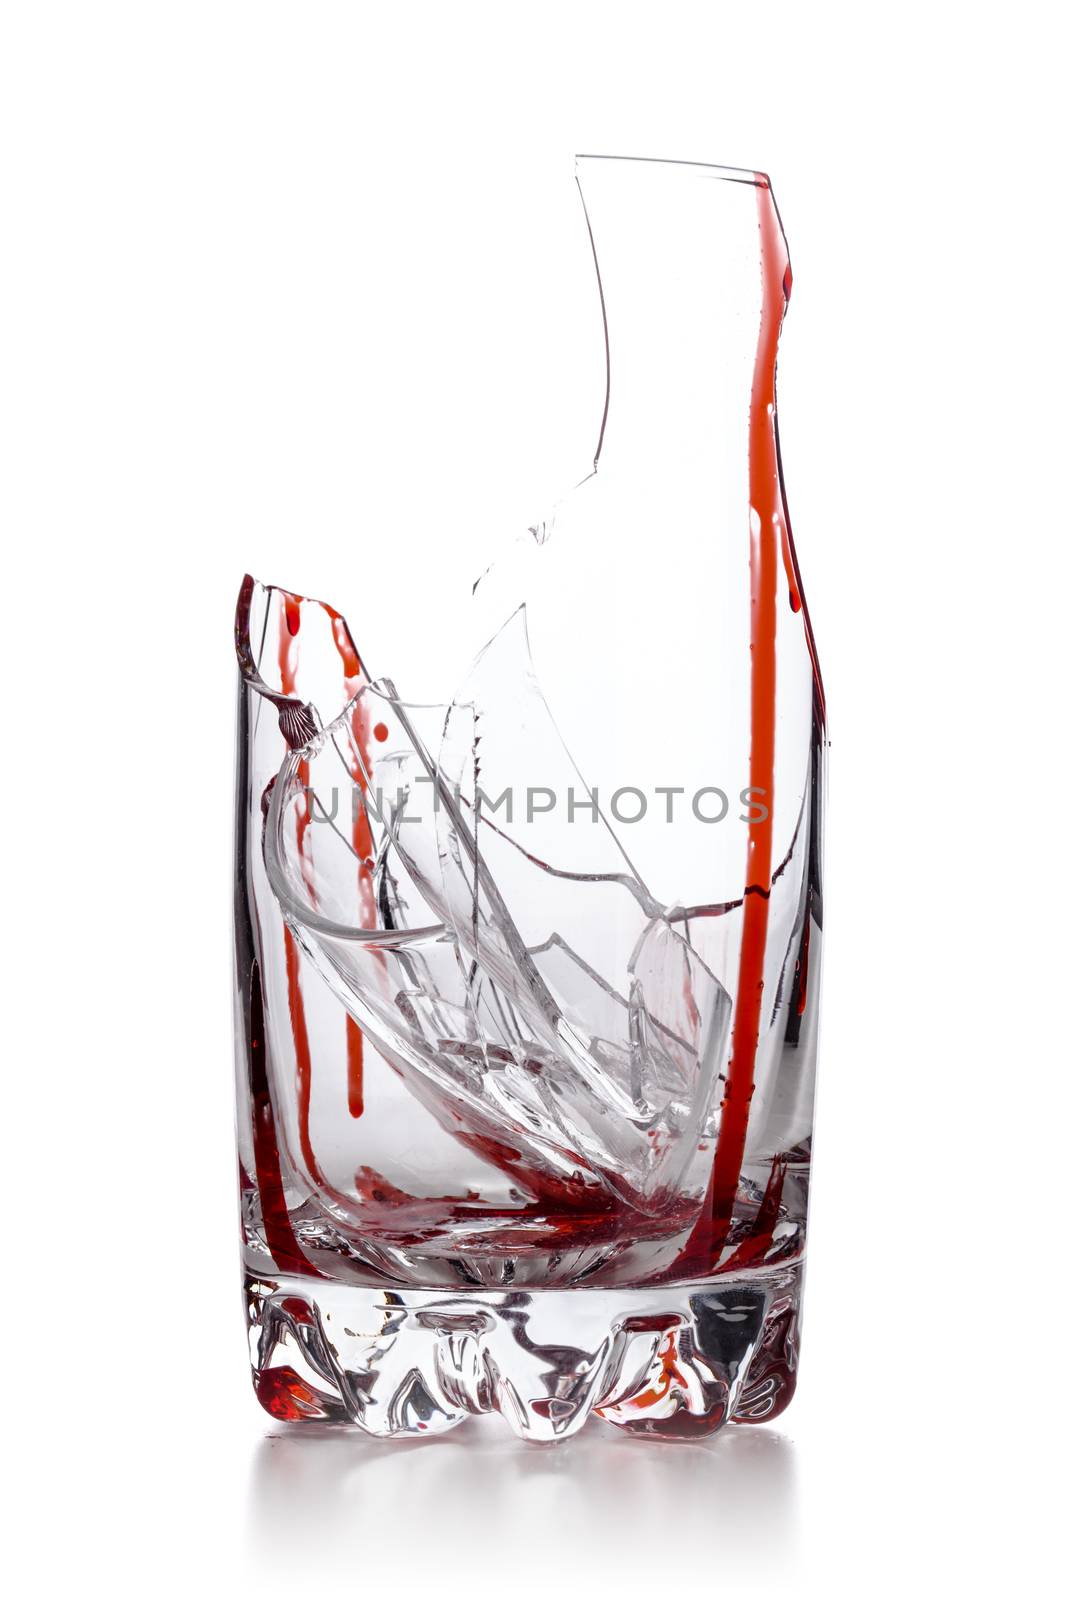 broken glass with blood isolated on white background